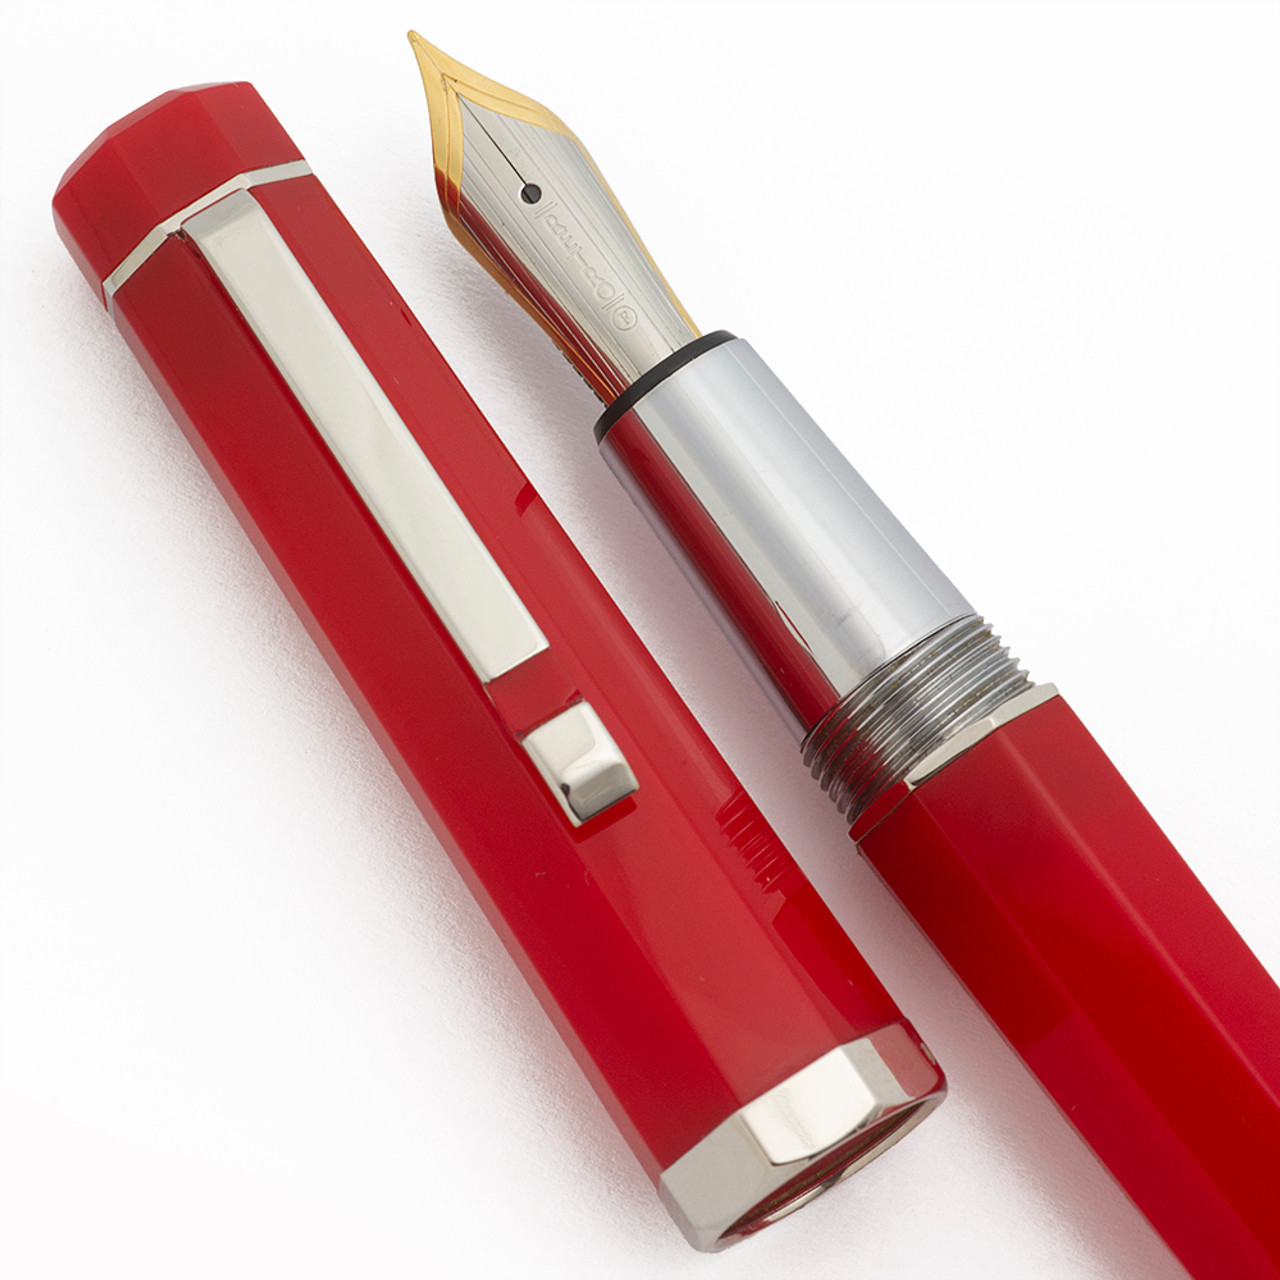 Retro 51 Double 8 Fountain Pen (2000s) - Red Faceted w Chrome Trim, C/C, Fine Steel Nib (Excellent +, Works Well)